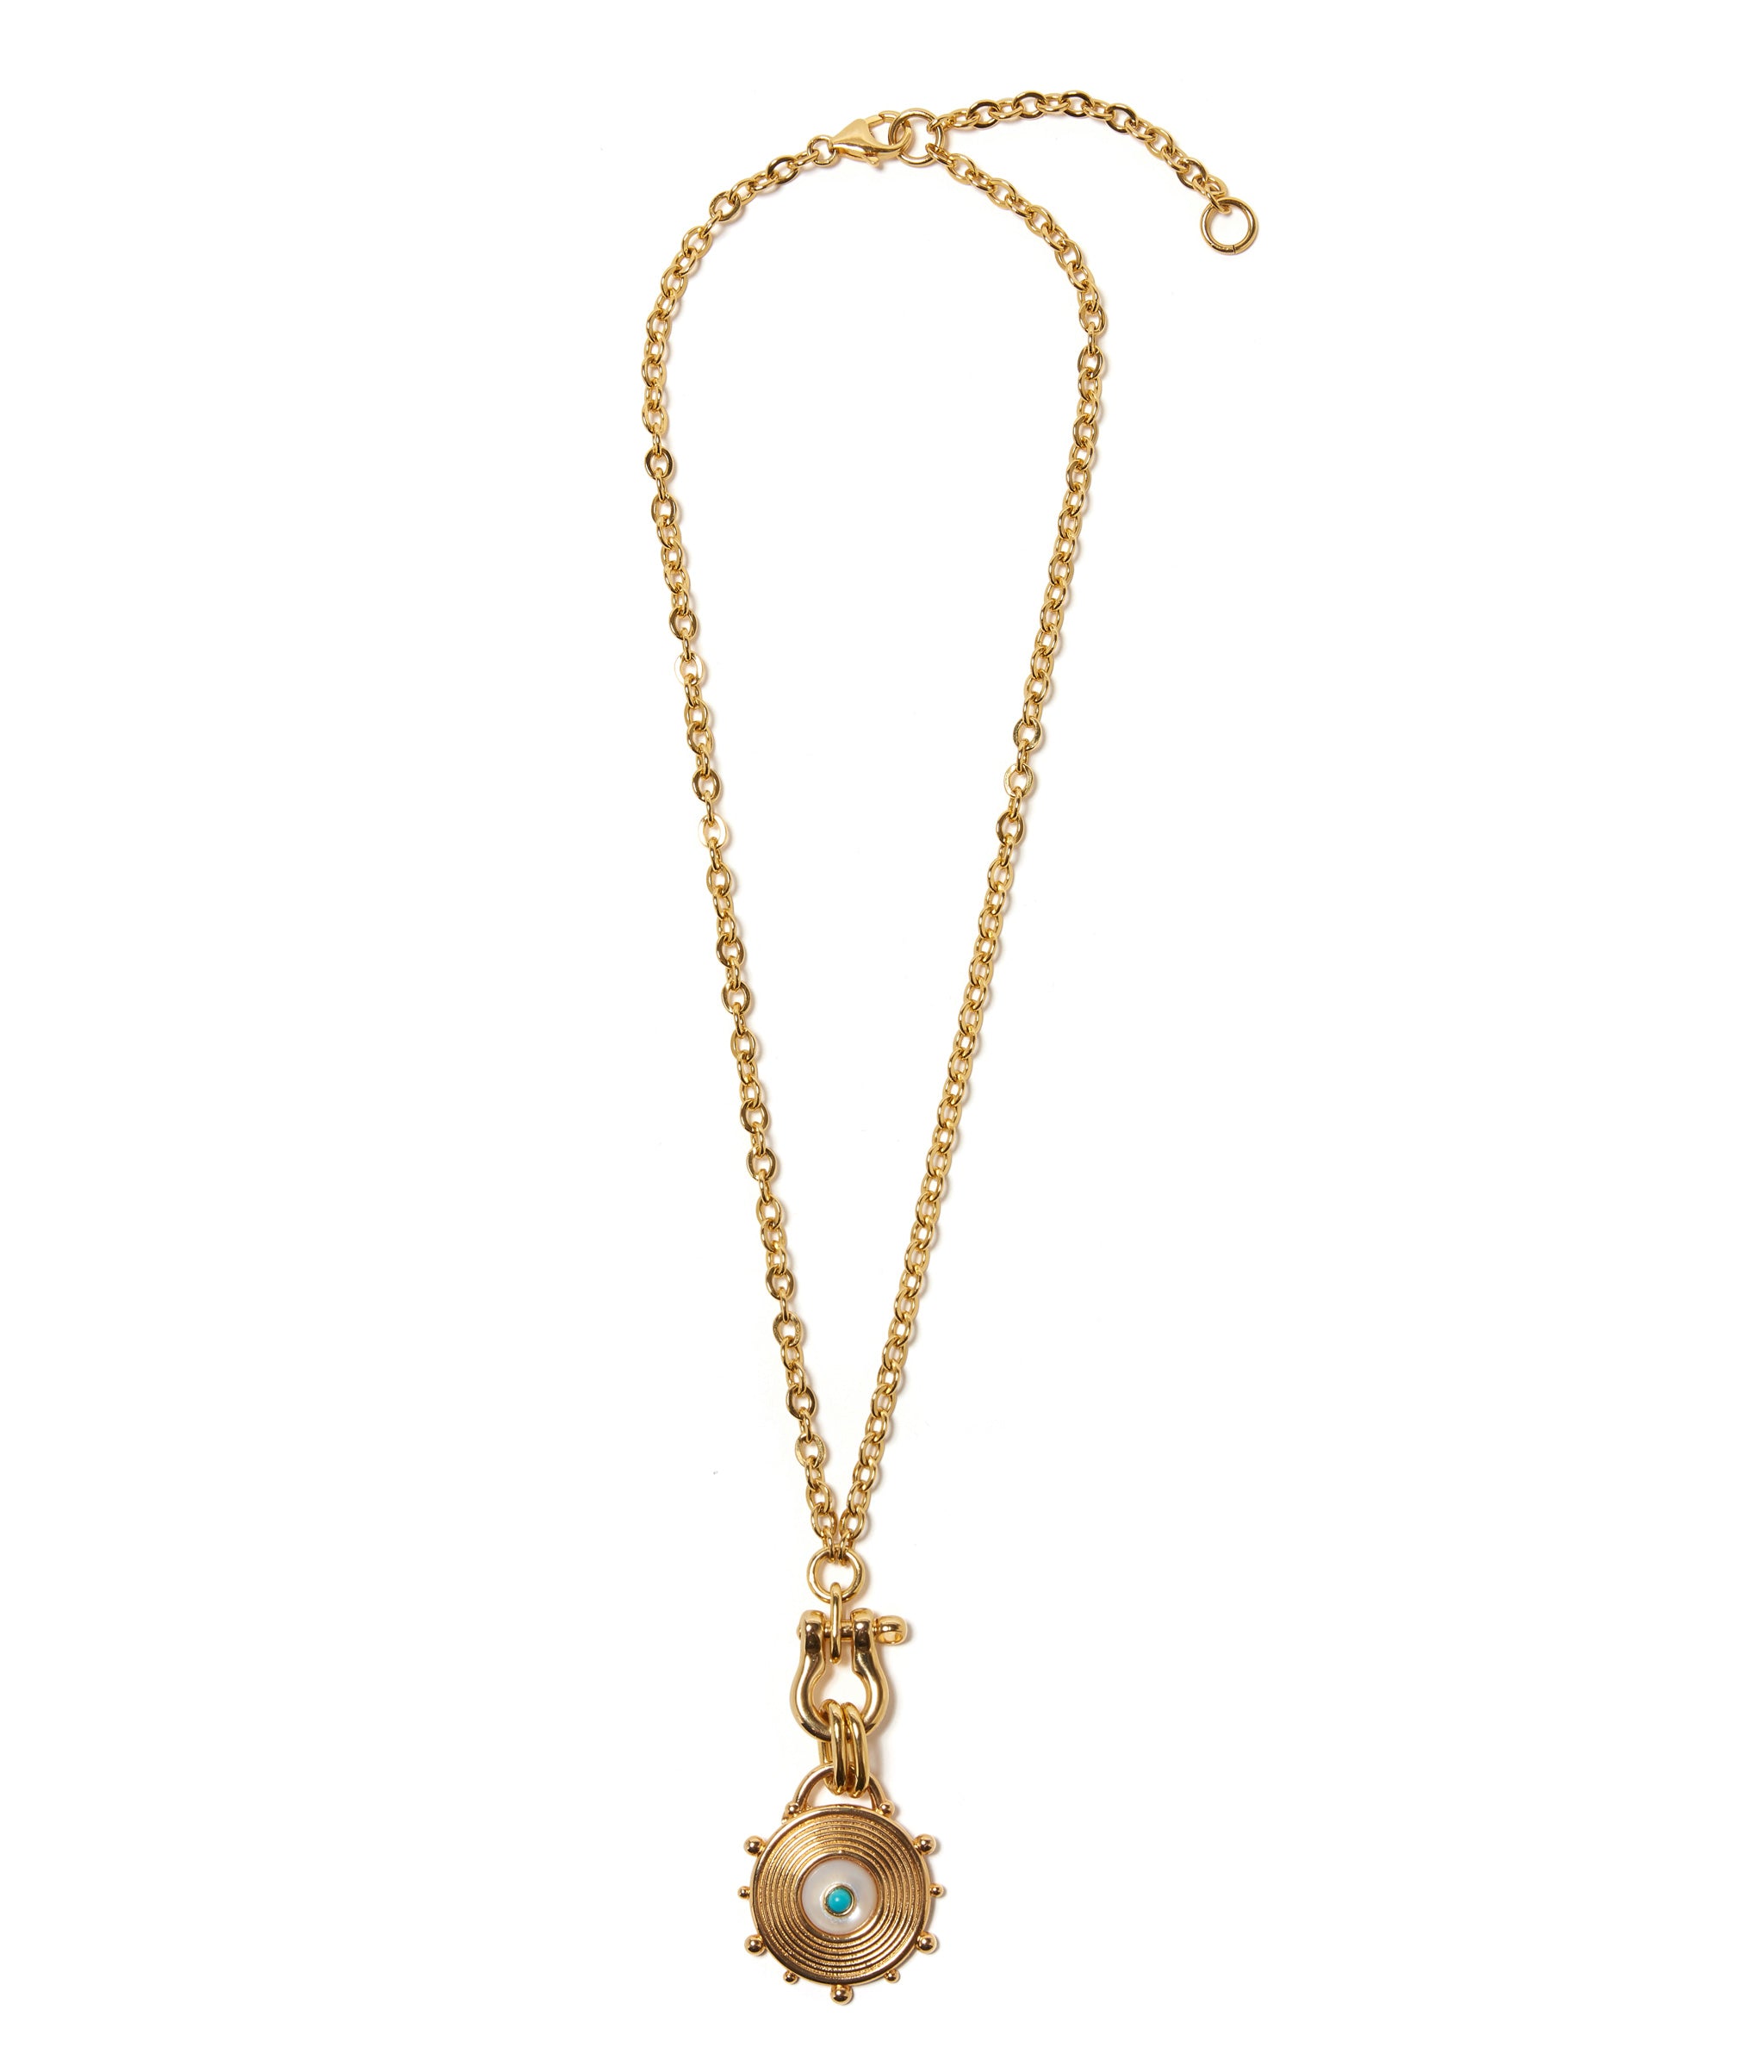 Helm Necklace in Pearl. Gold-plated chain with ridged wheel-shaped pendant inset with mother-of-pearl and turquoise